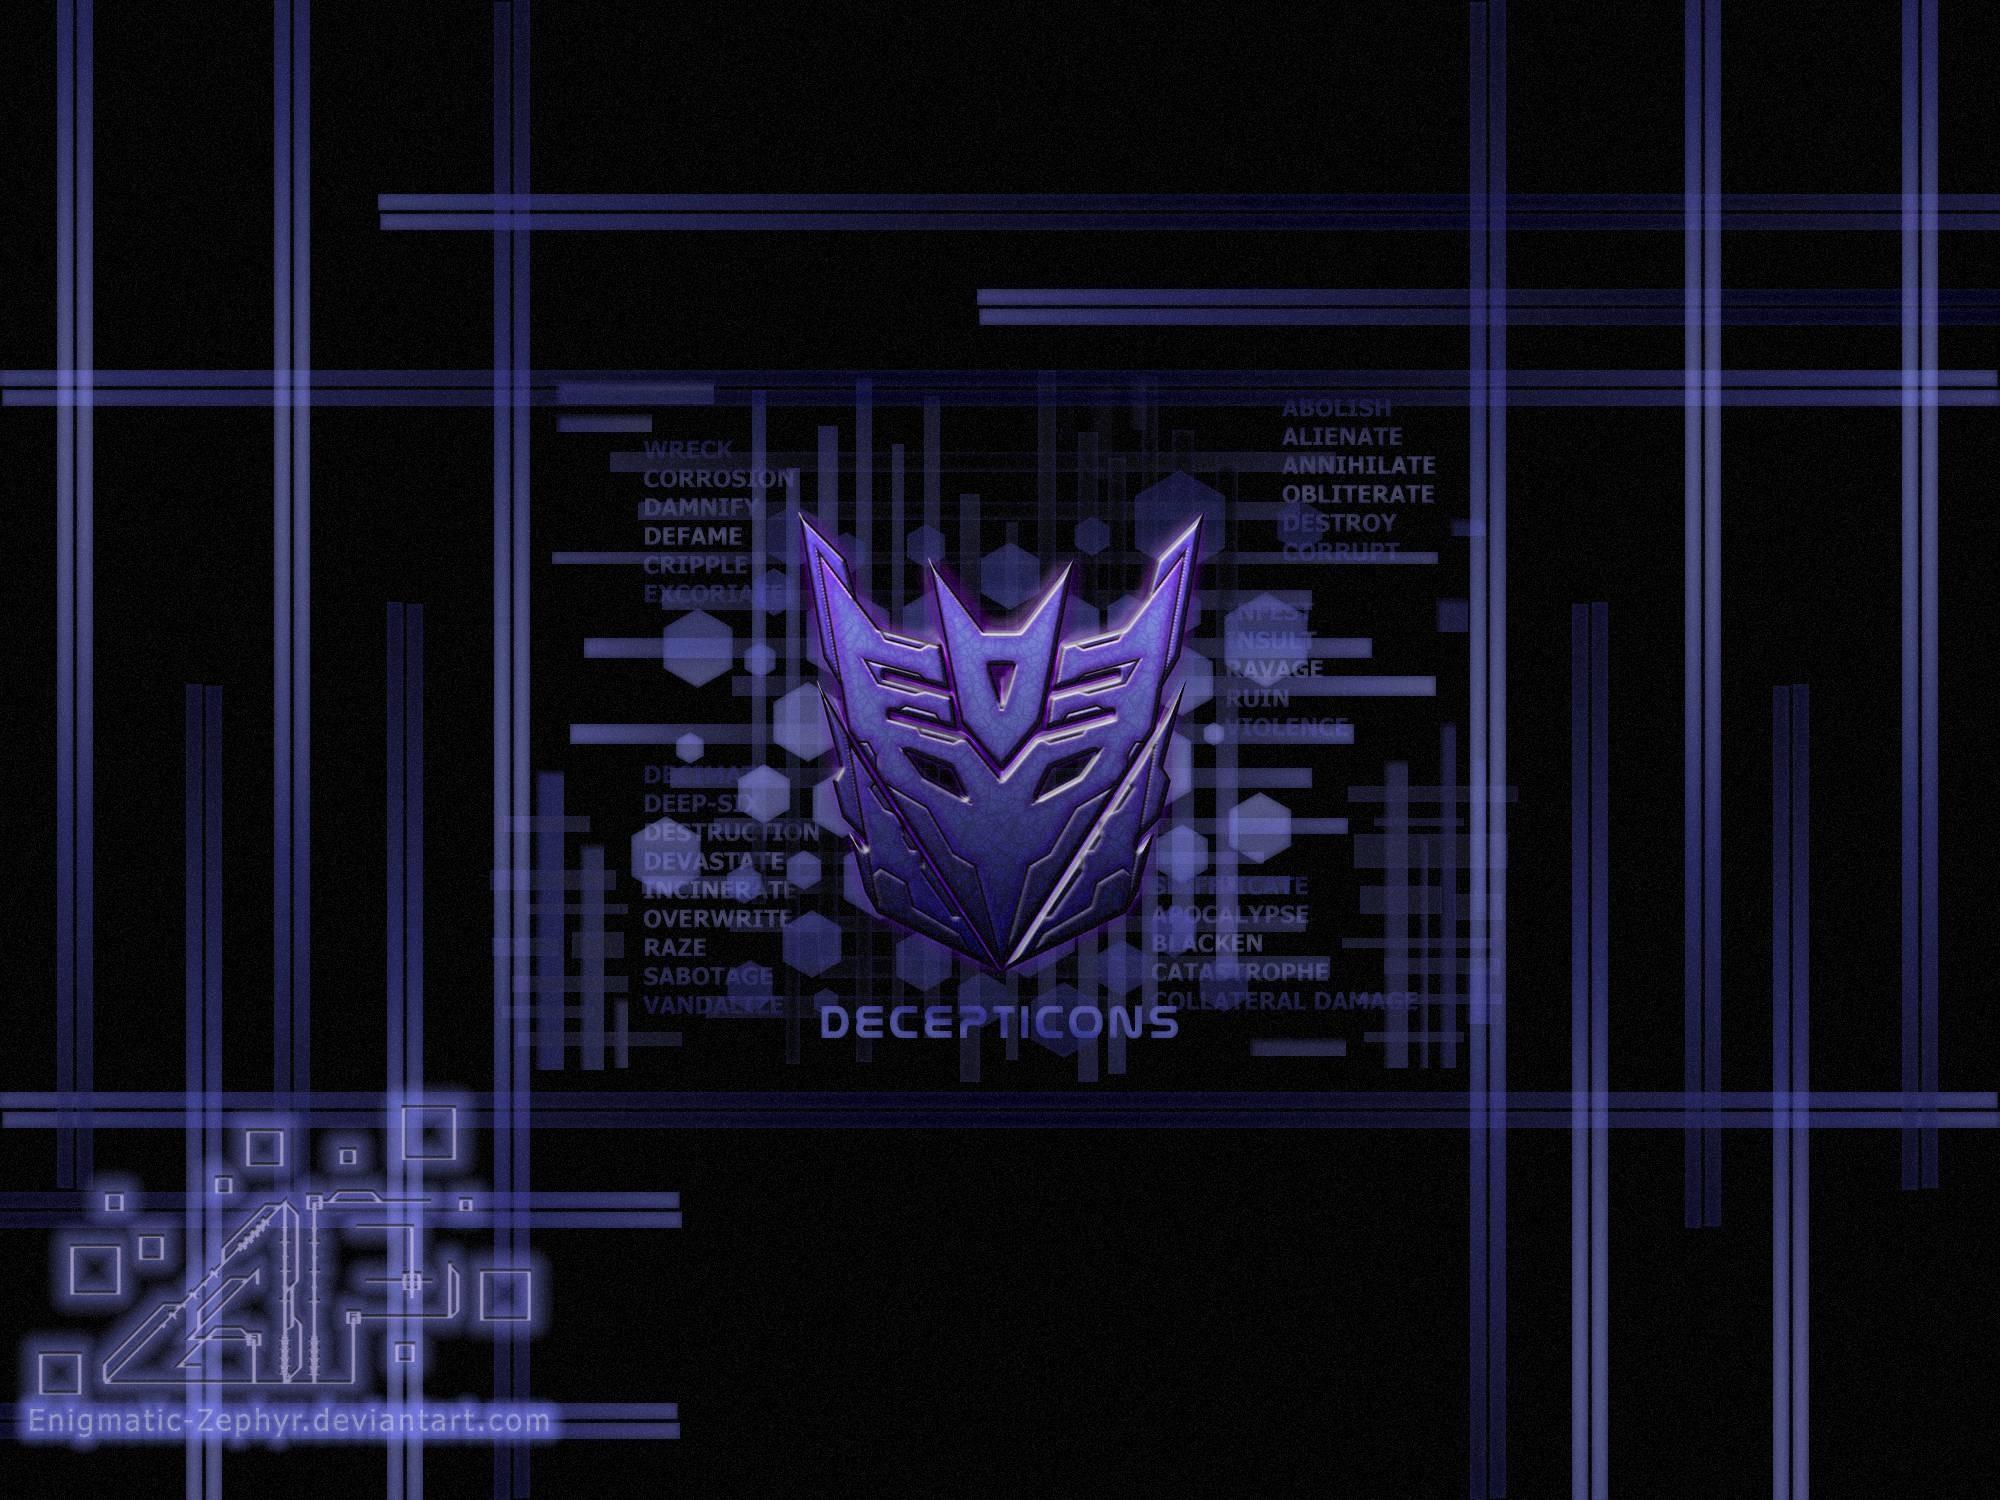 Transformers Decepticons Wallpaper (the best image in 2018)